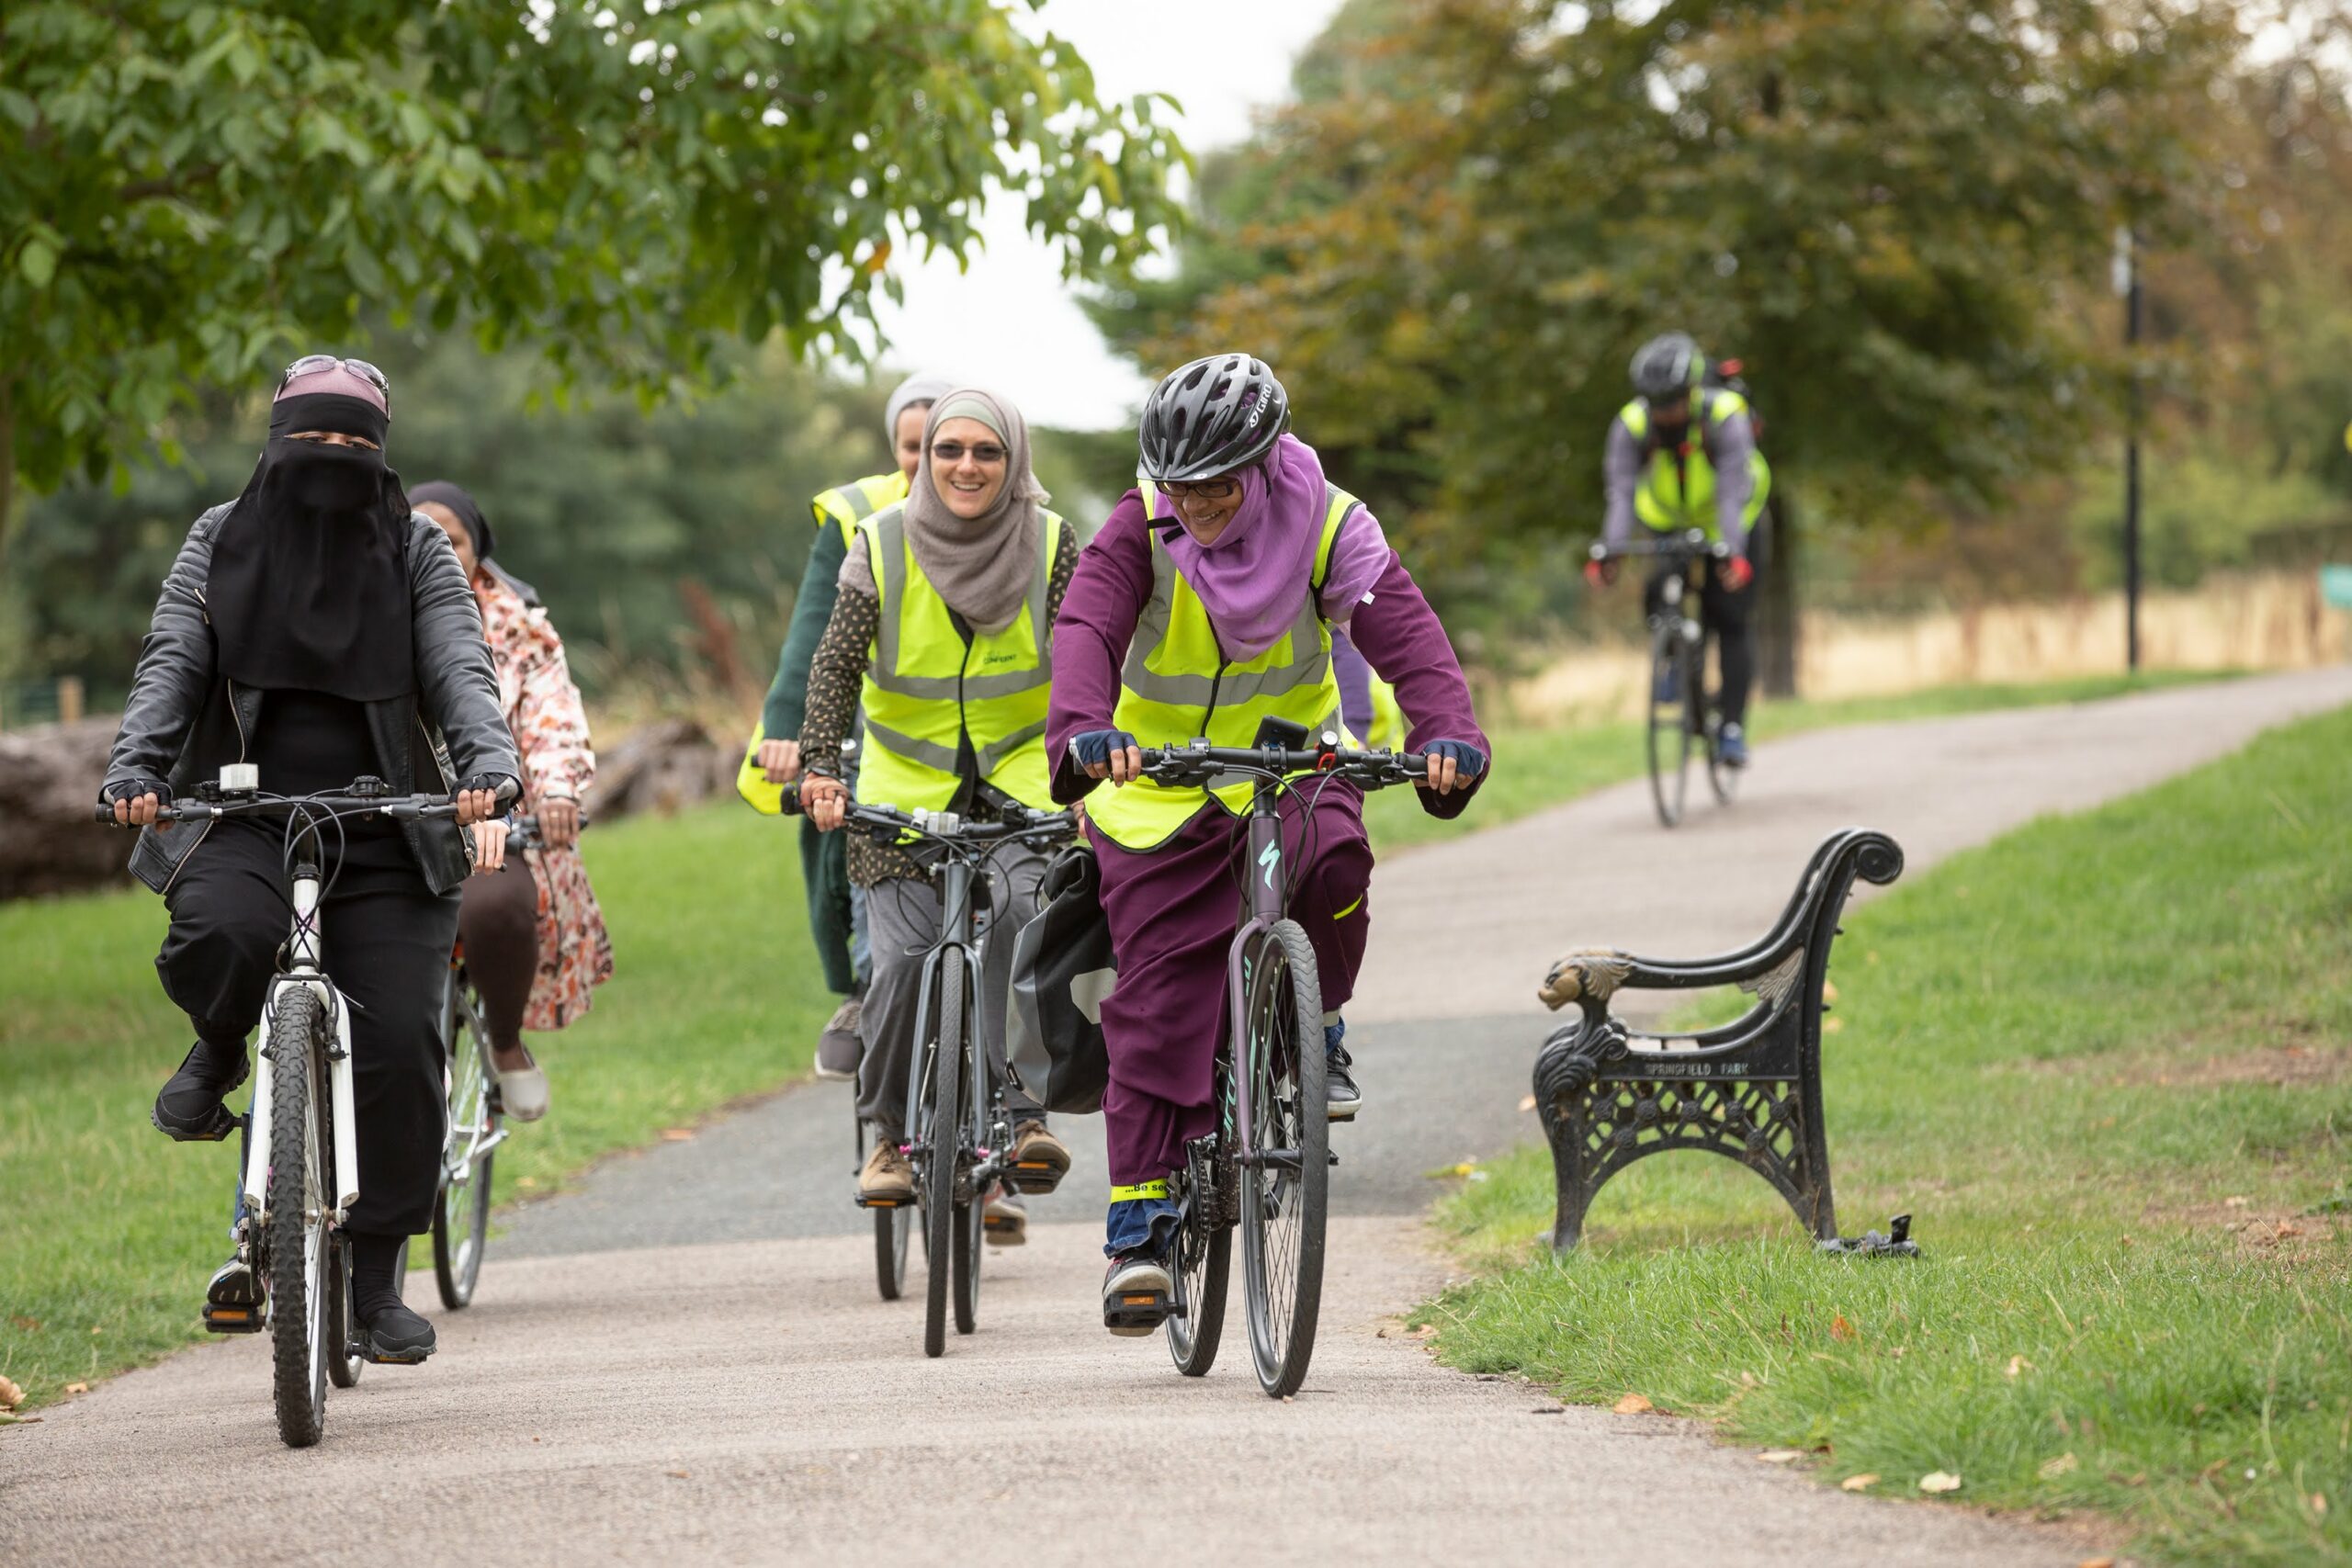 A group of women cycling in a park, wearing hijabs and other headscarves